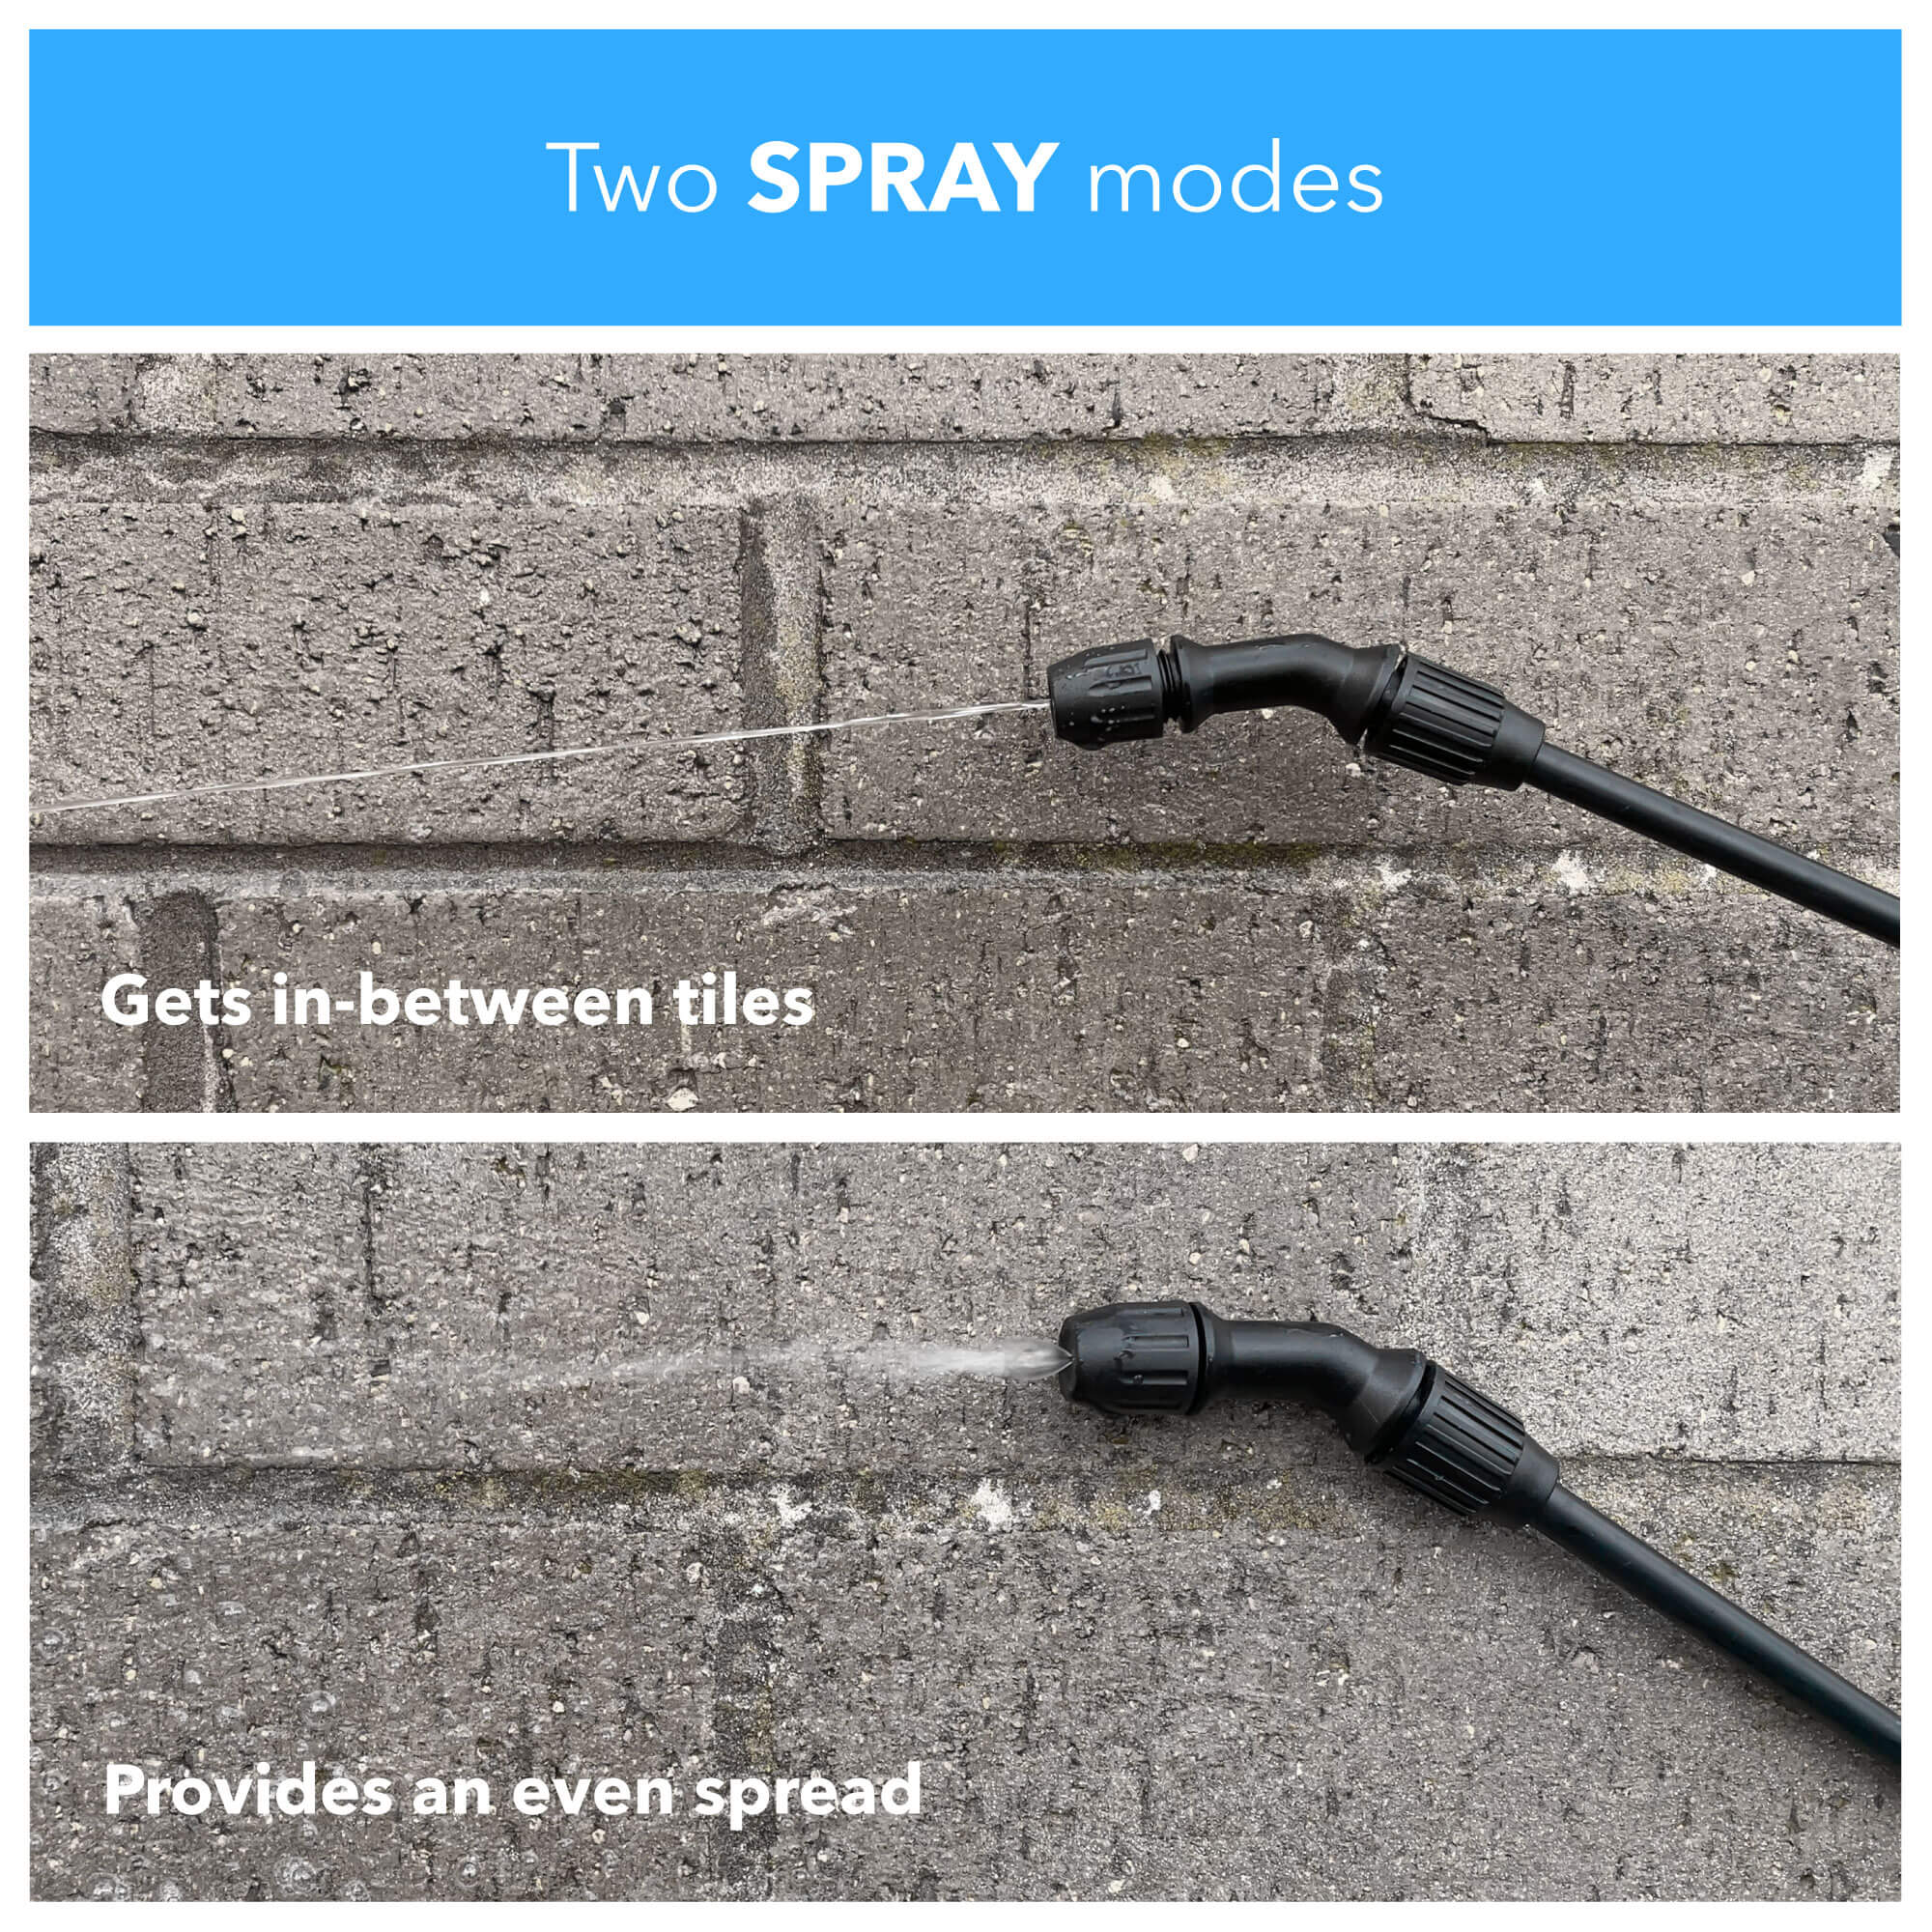 Two spray modes, one gets in-between tiles, the other provides an even spread